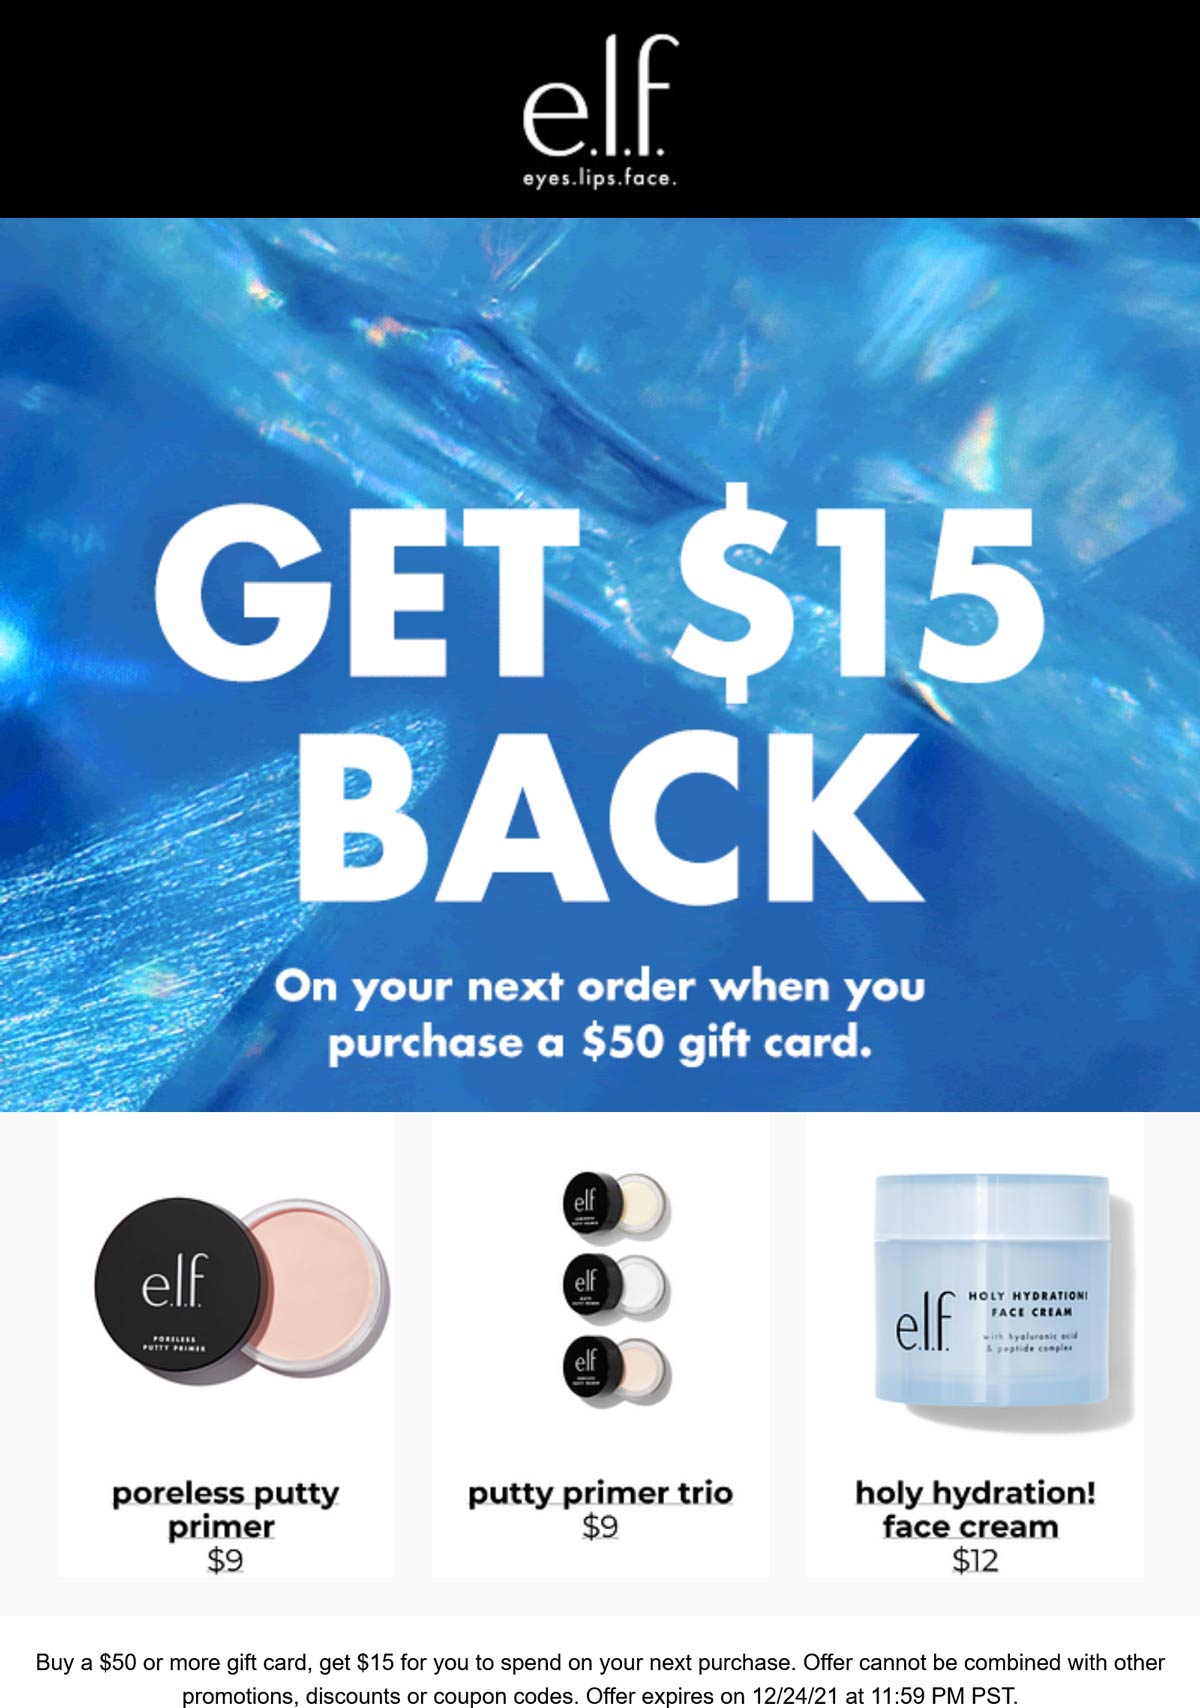 e.l.f. Cosmetics stores Coupon  $15 followup card free with your $50 gift card at e.l.f. Cosmetics #elfcosmetics 